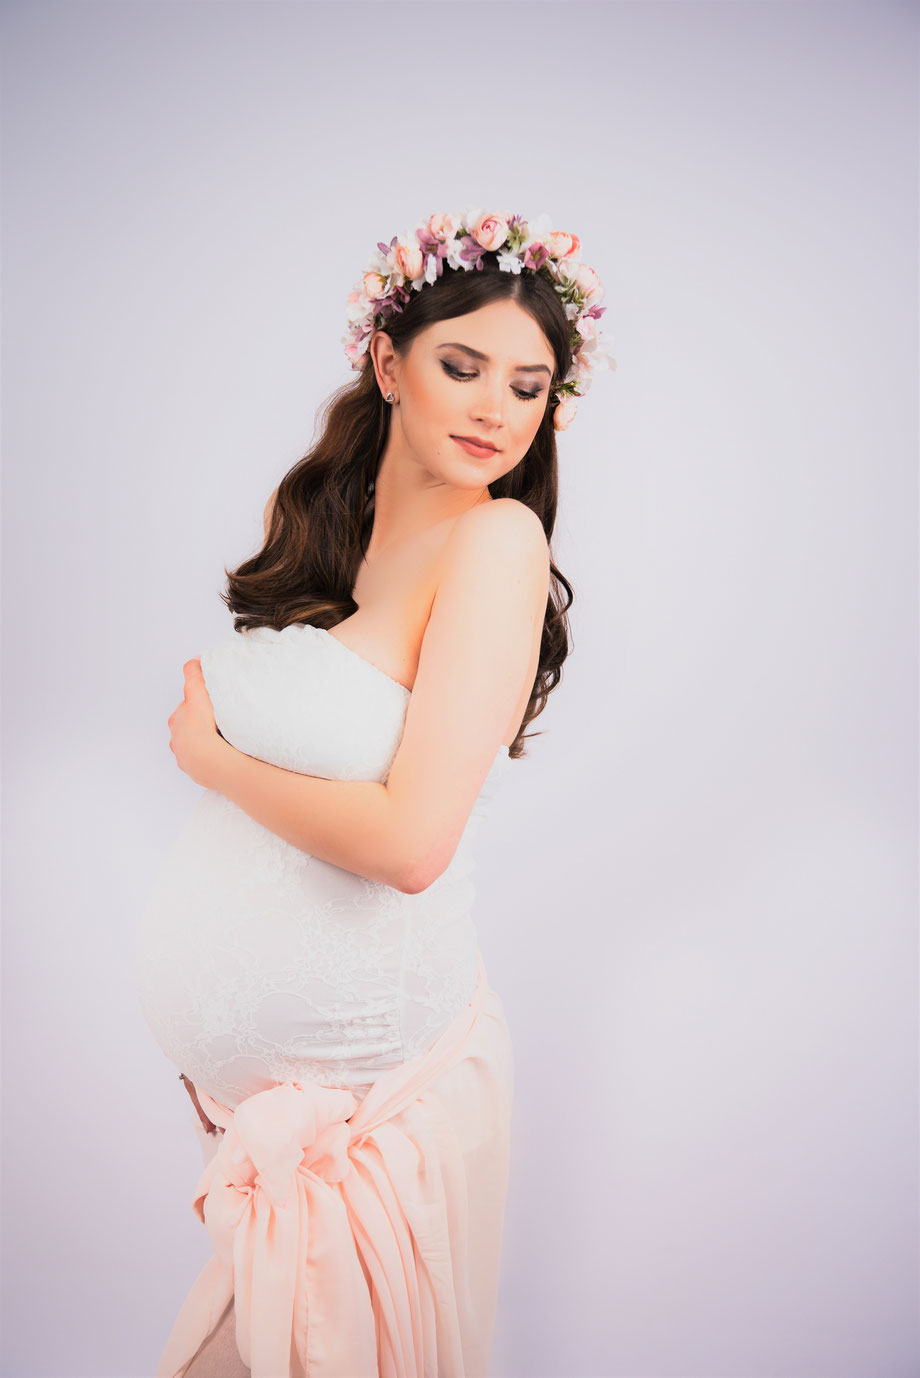 pregnant woman with flowers on head